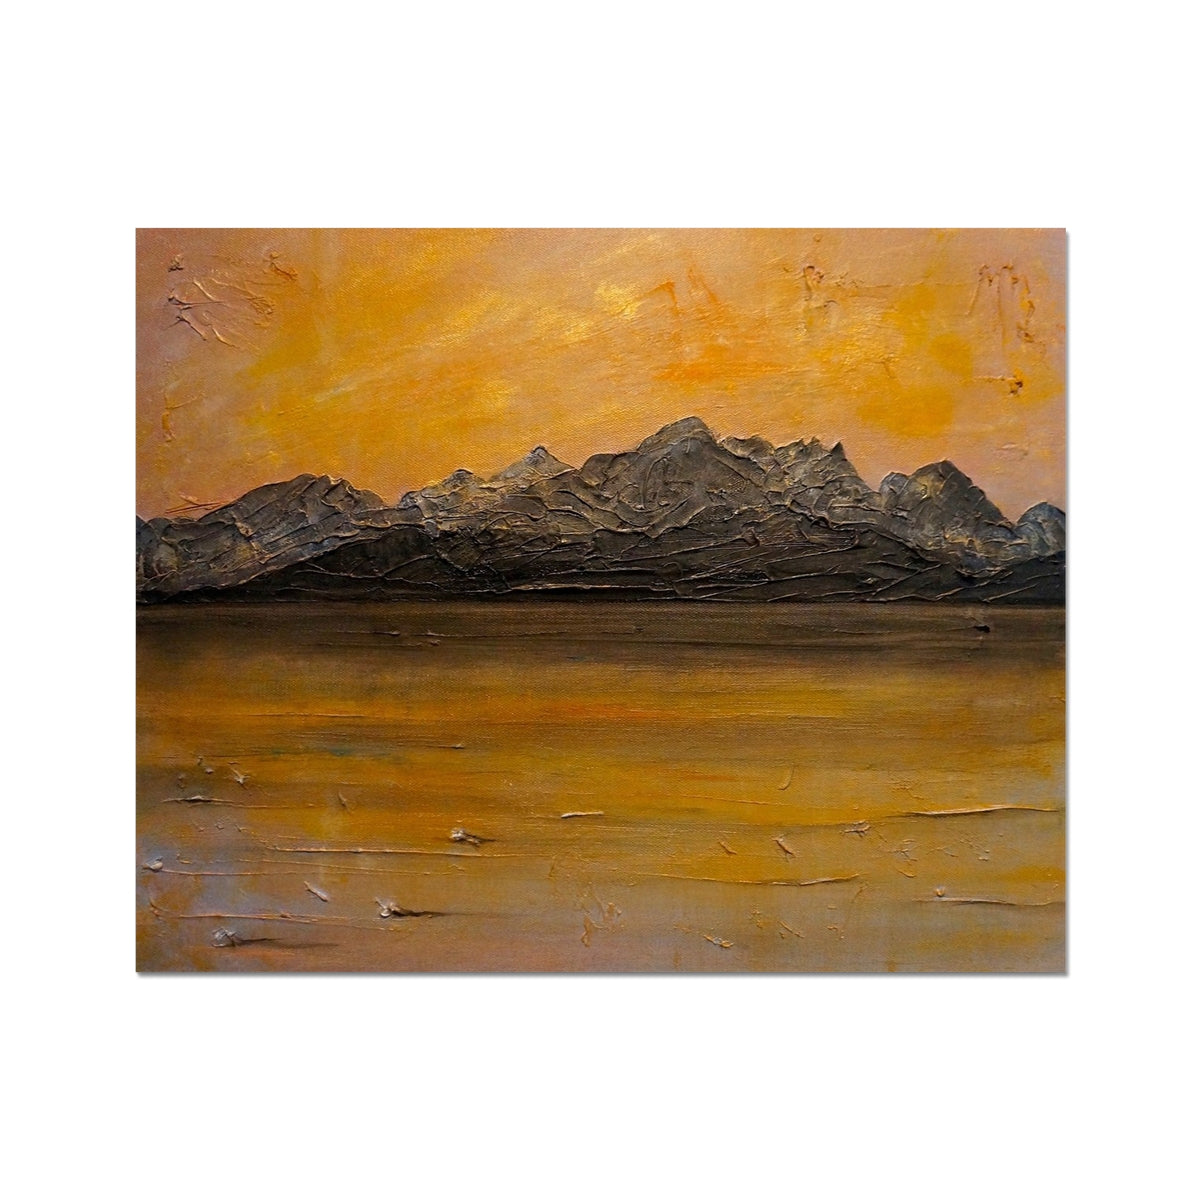 Cuillin Sunset Skye Painting | Hahnemühle German Etching Prints From Scotland-Fine art-Skye Art Gallery-20"x16"-Paintings, Prints, Homeware, Art Gifts From Scotland By Scottish Artist Kevin Hunter